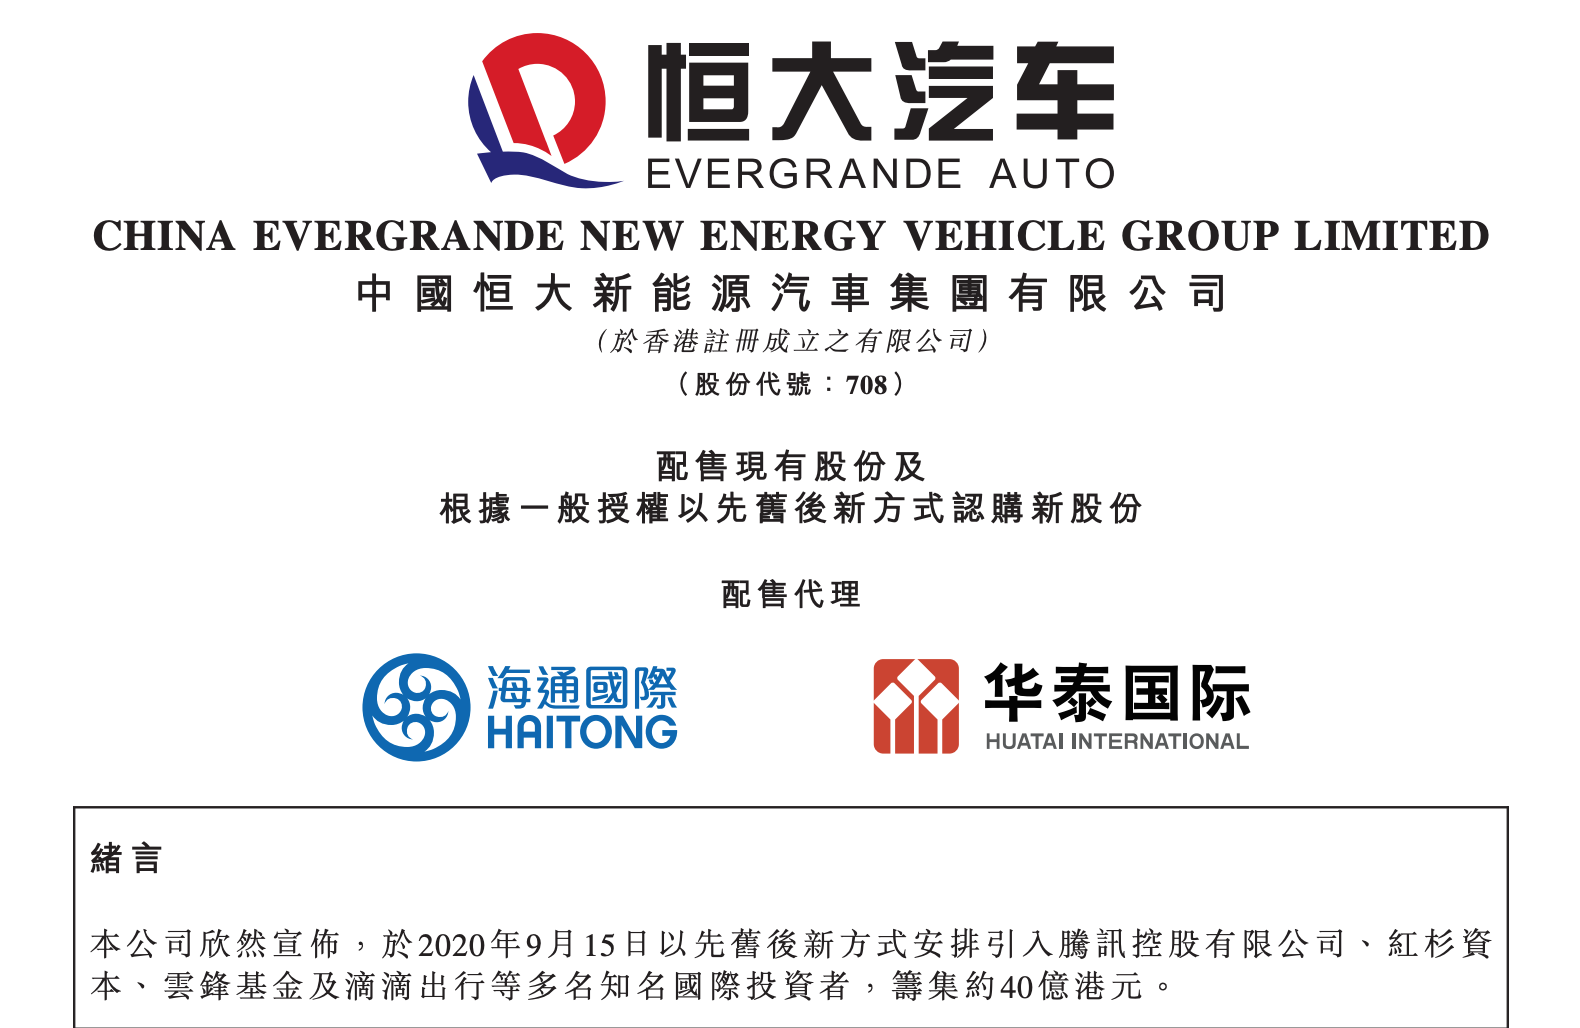 Evergrande Auto's first financing is announced, with Tencent Holdings and Yunfeng Fund among the investors.